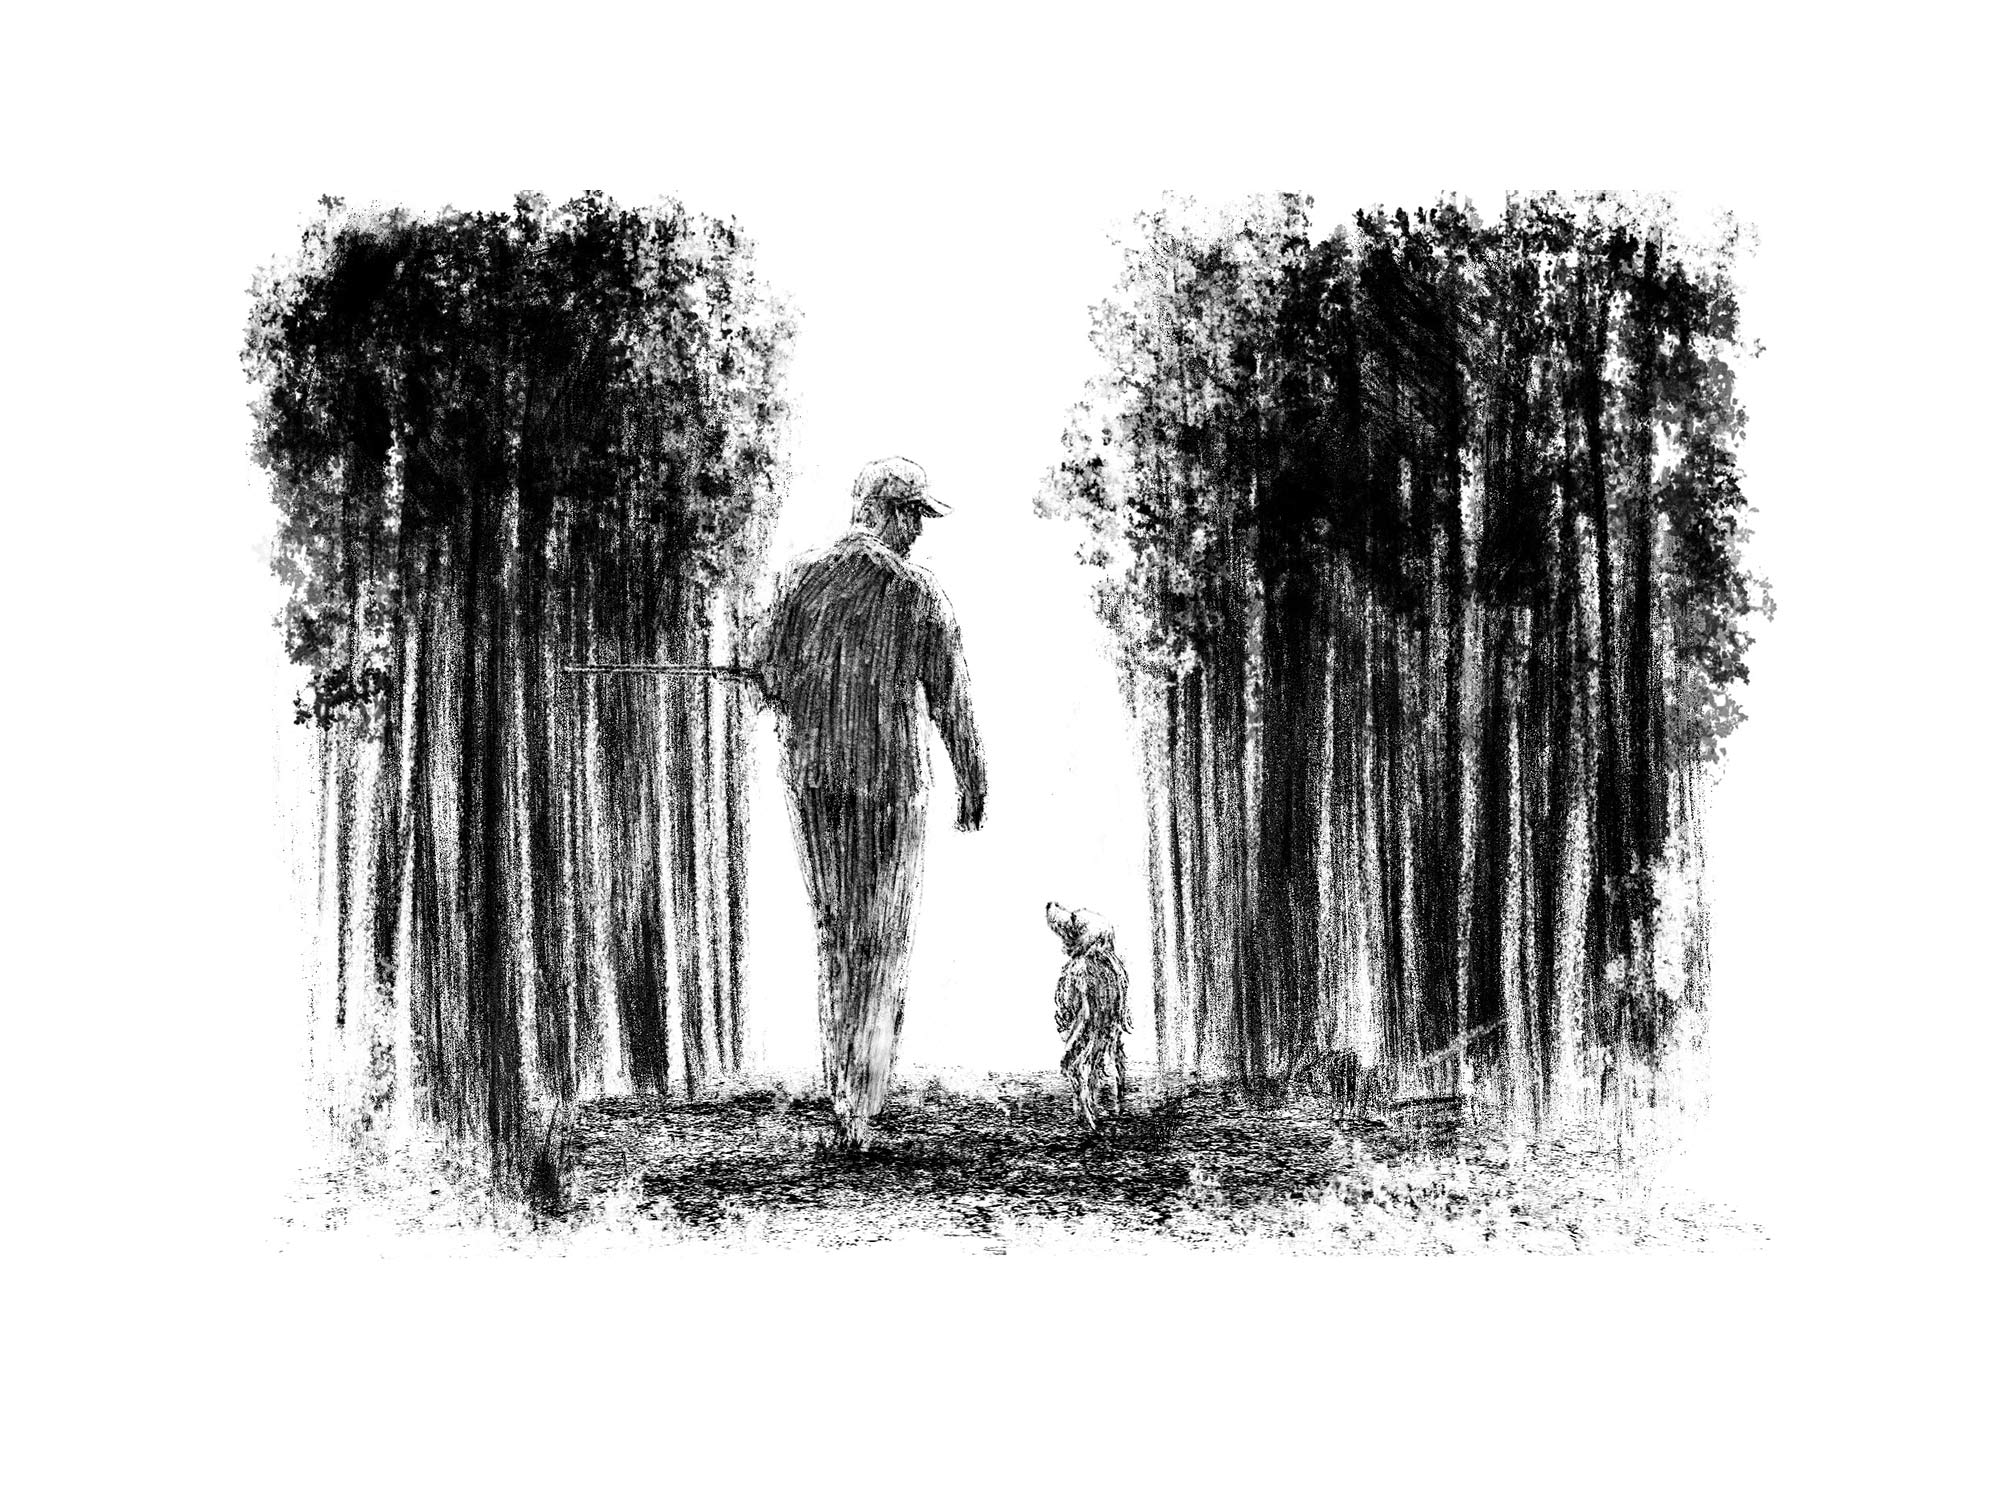 man and dog in woods illustration